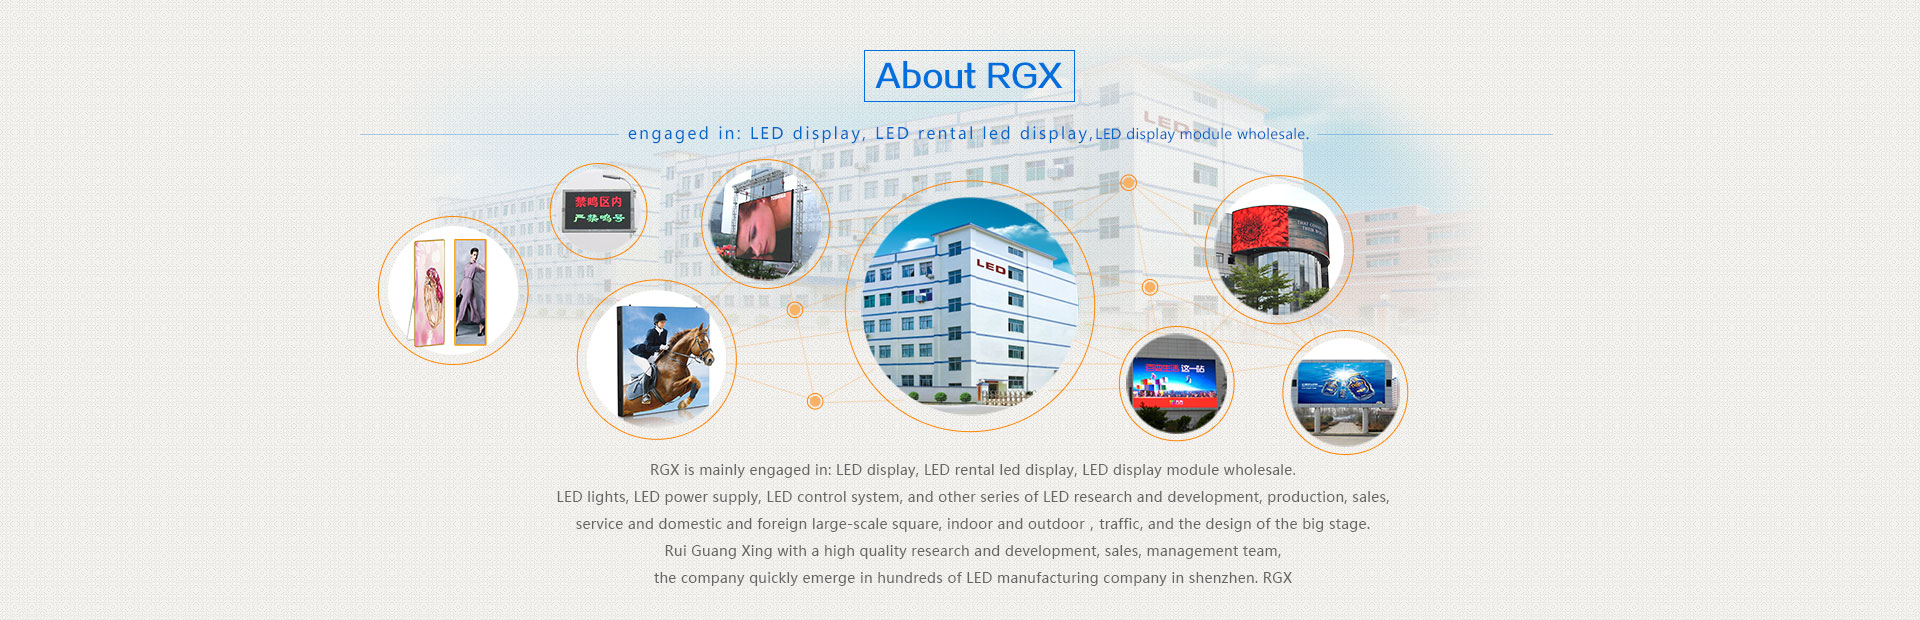 About RGX